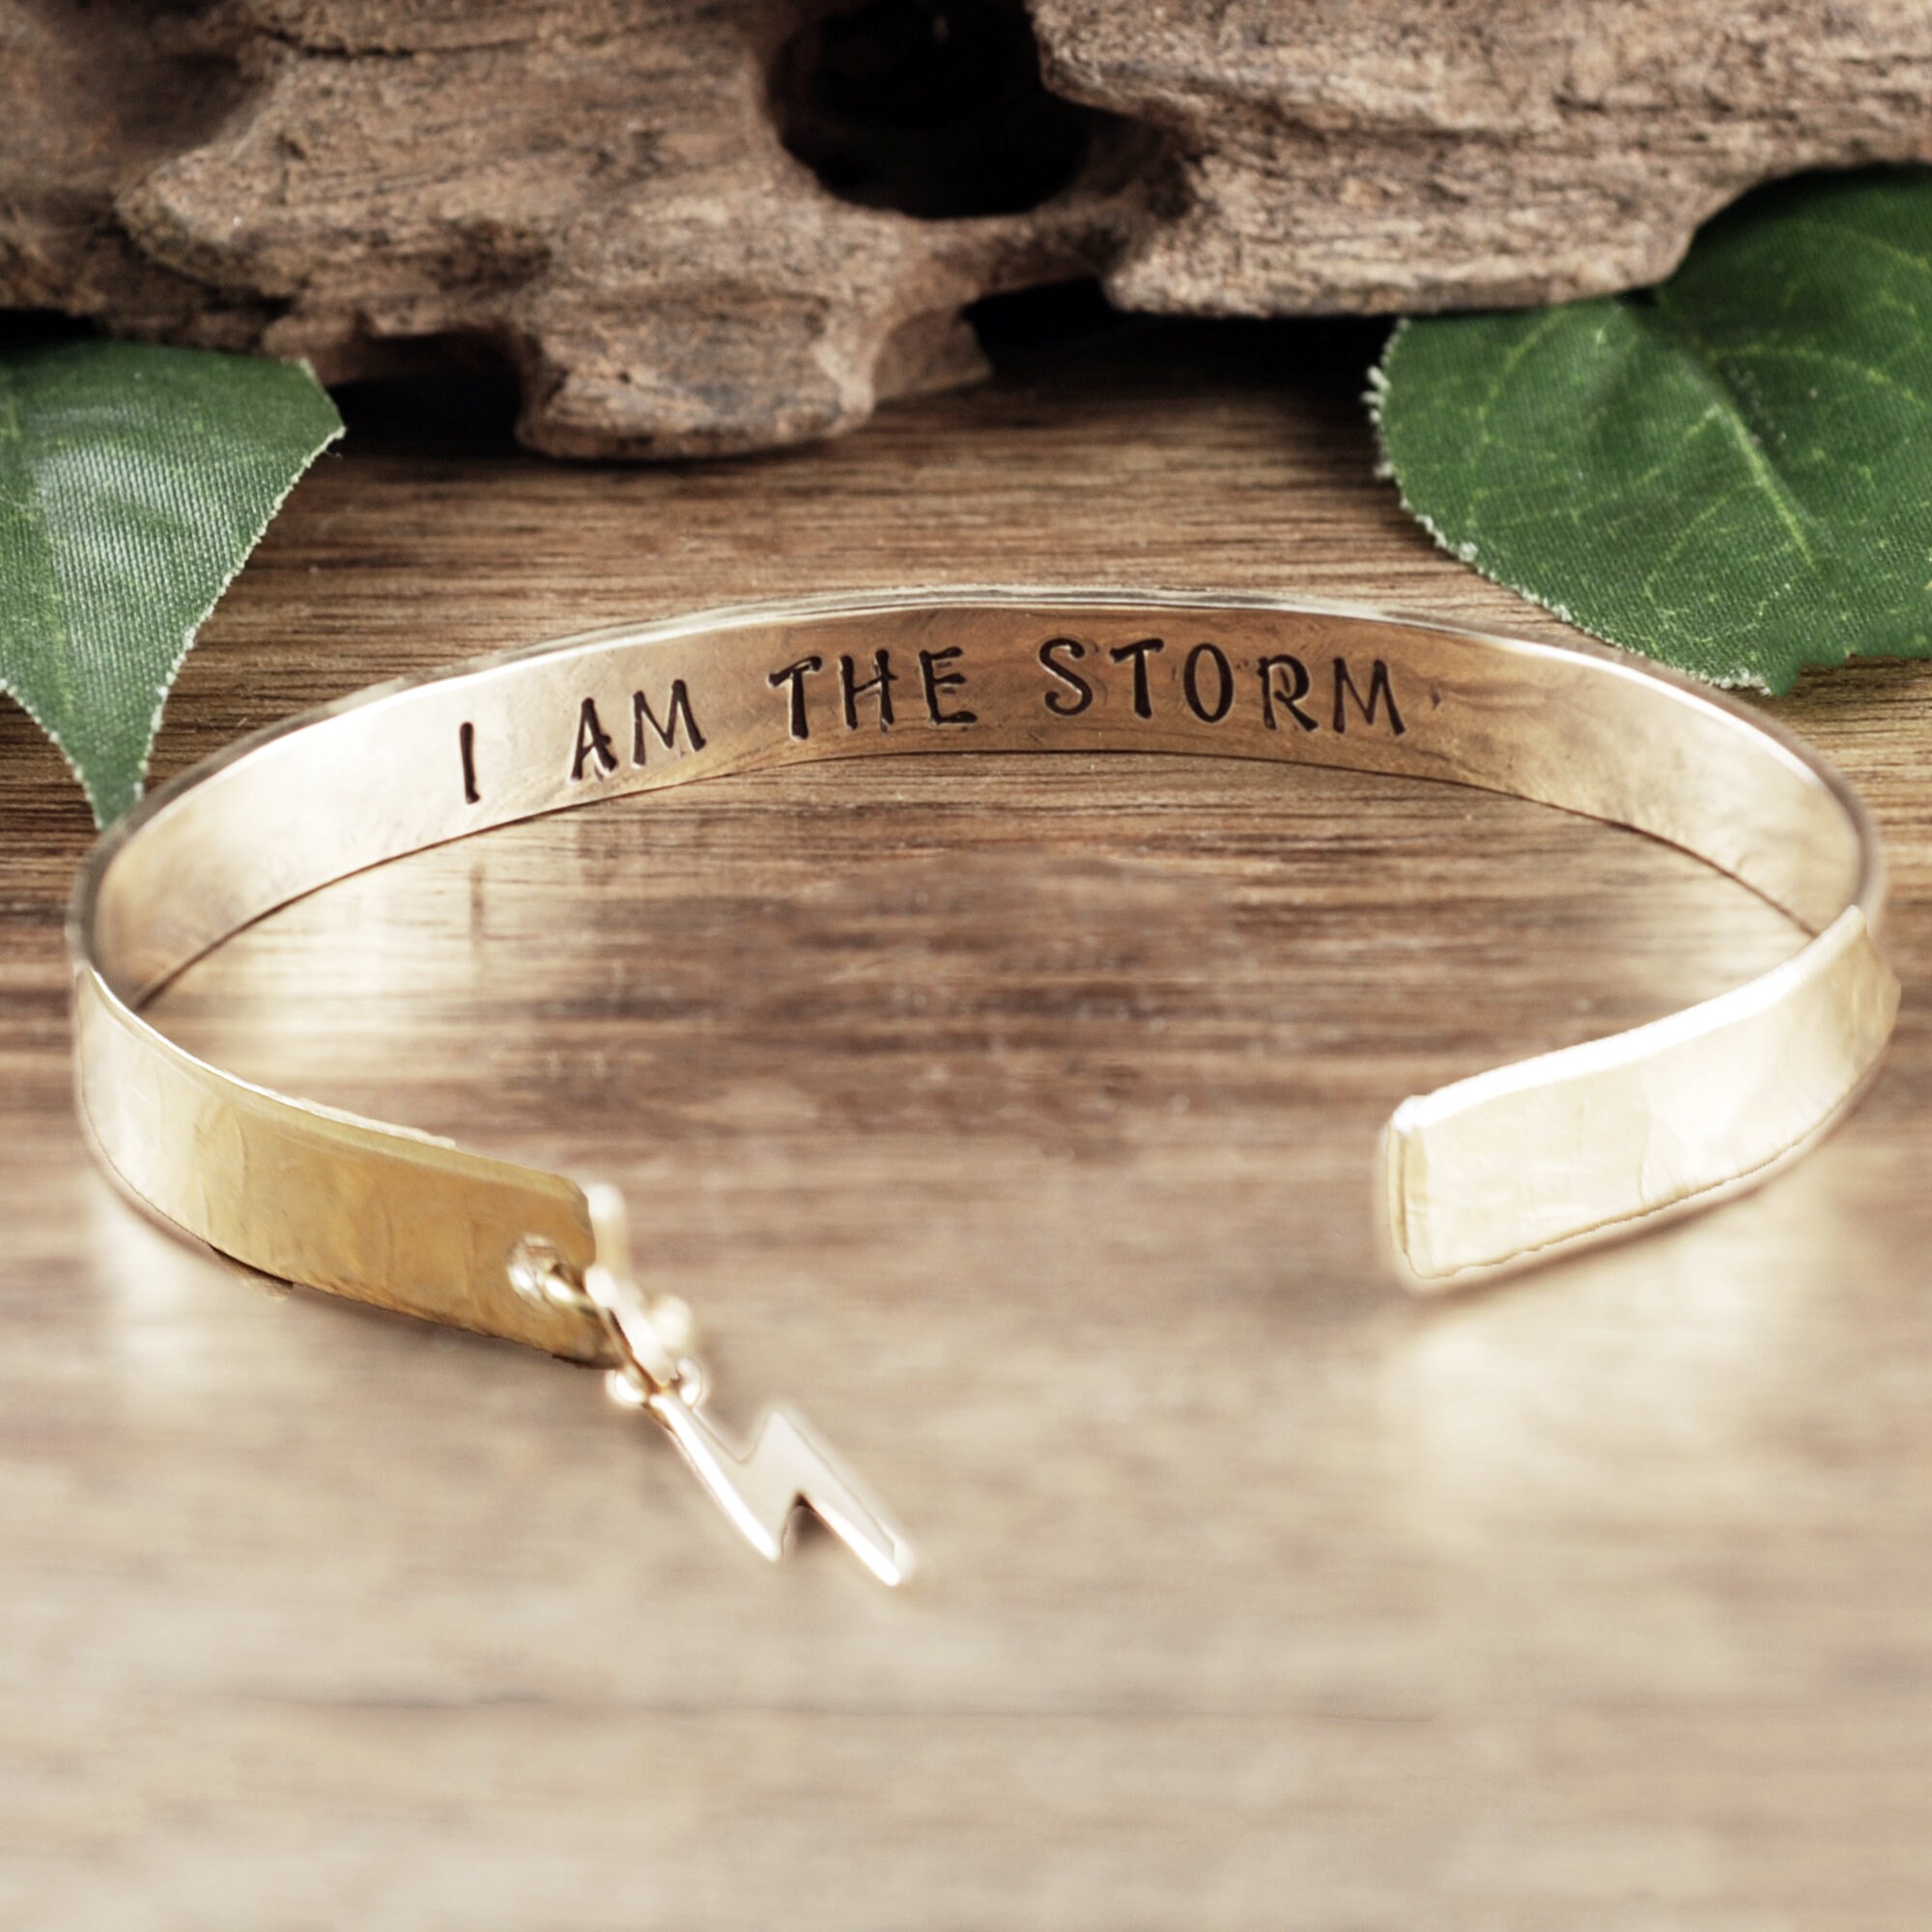 Fate whispered to the Warrior, I am the Storm Bracelet, Inspirational ...